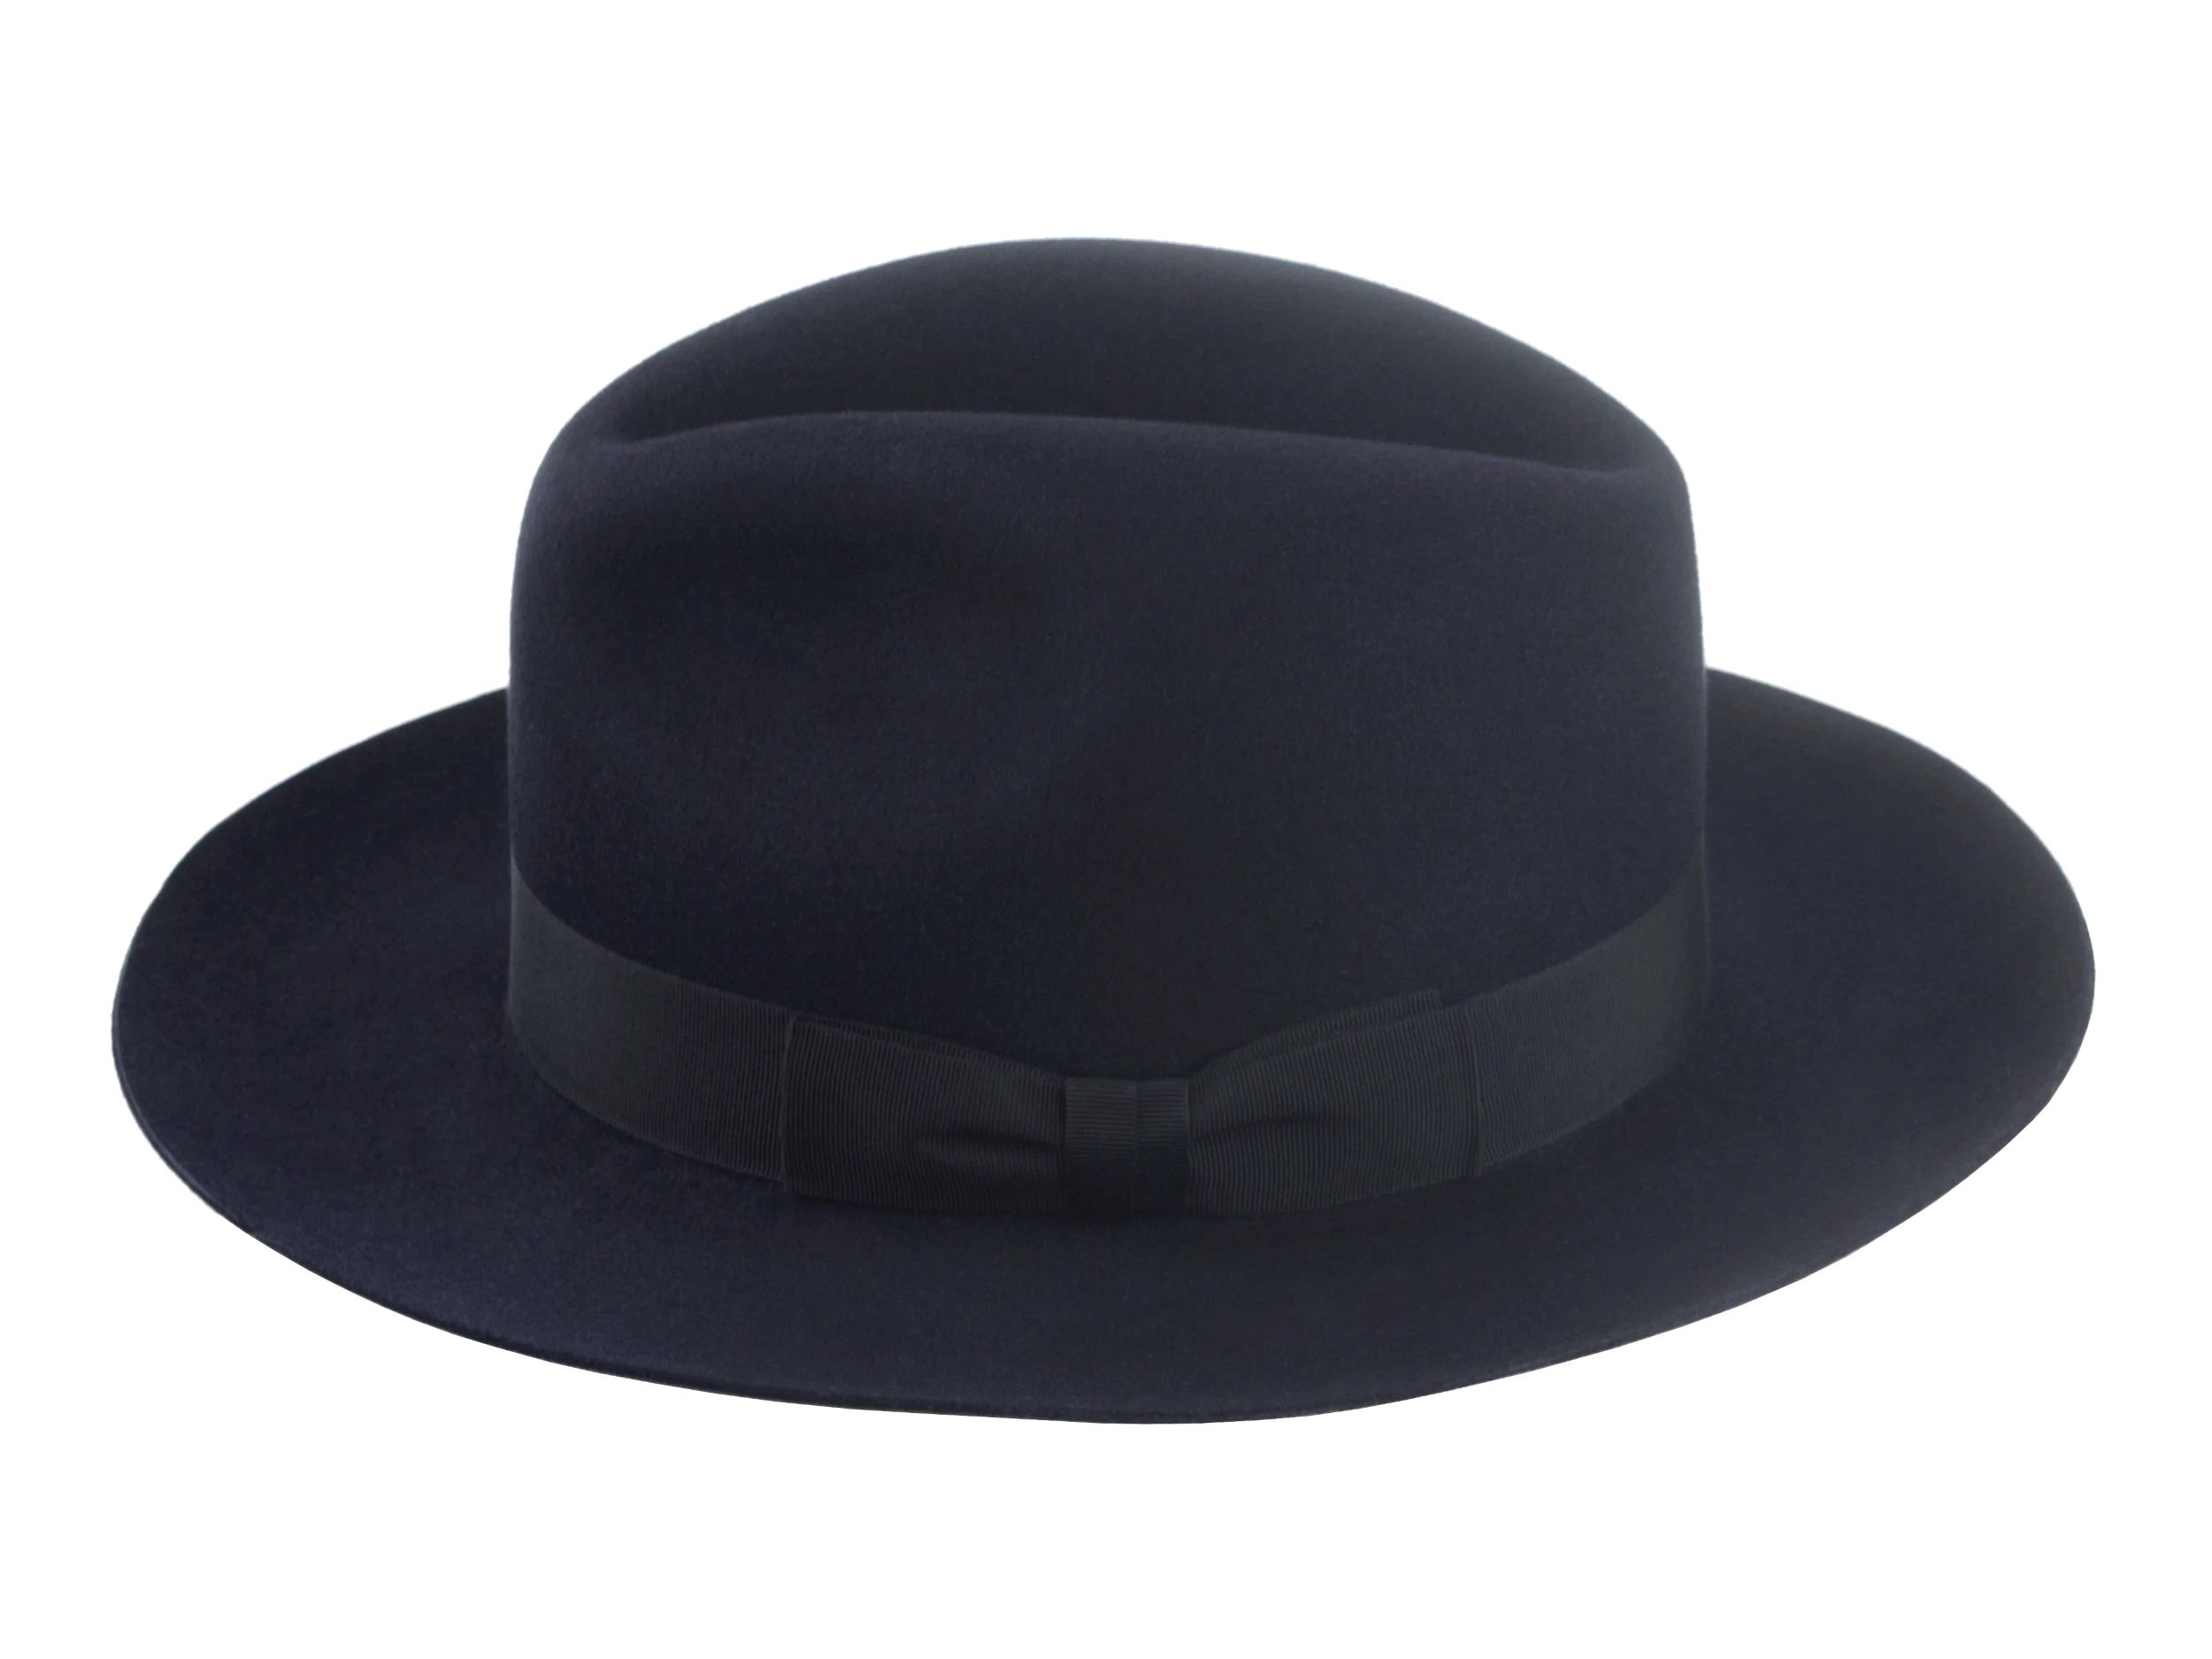 The Brando: View of the 1 1/4" black grosgrain ribbon hatband for a touch of elegance | Agnoulita Hats